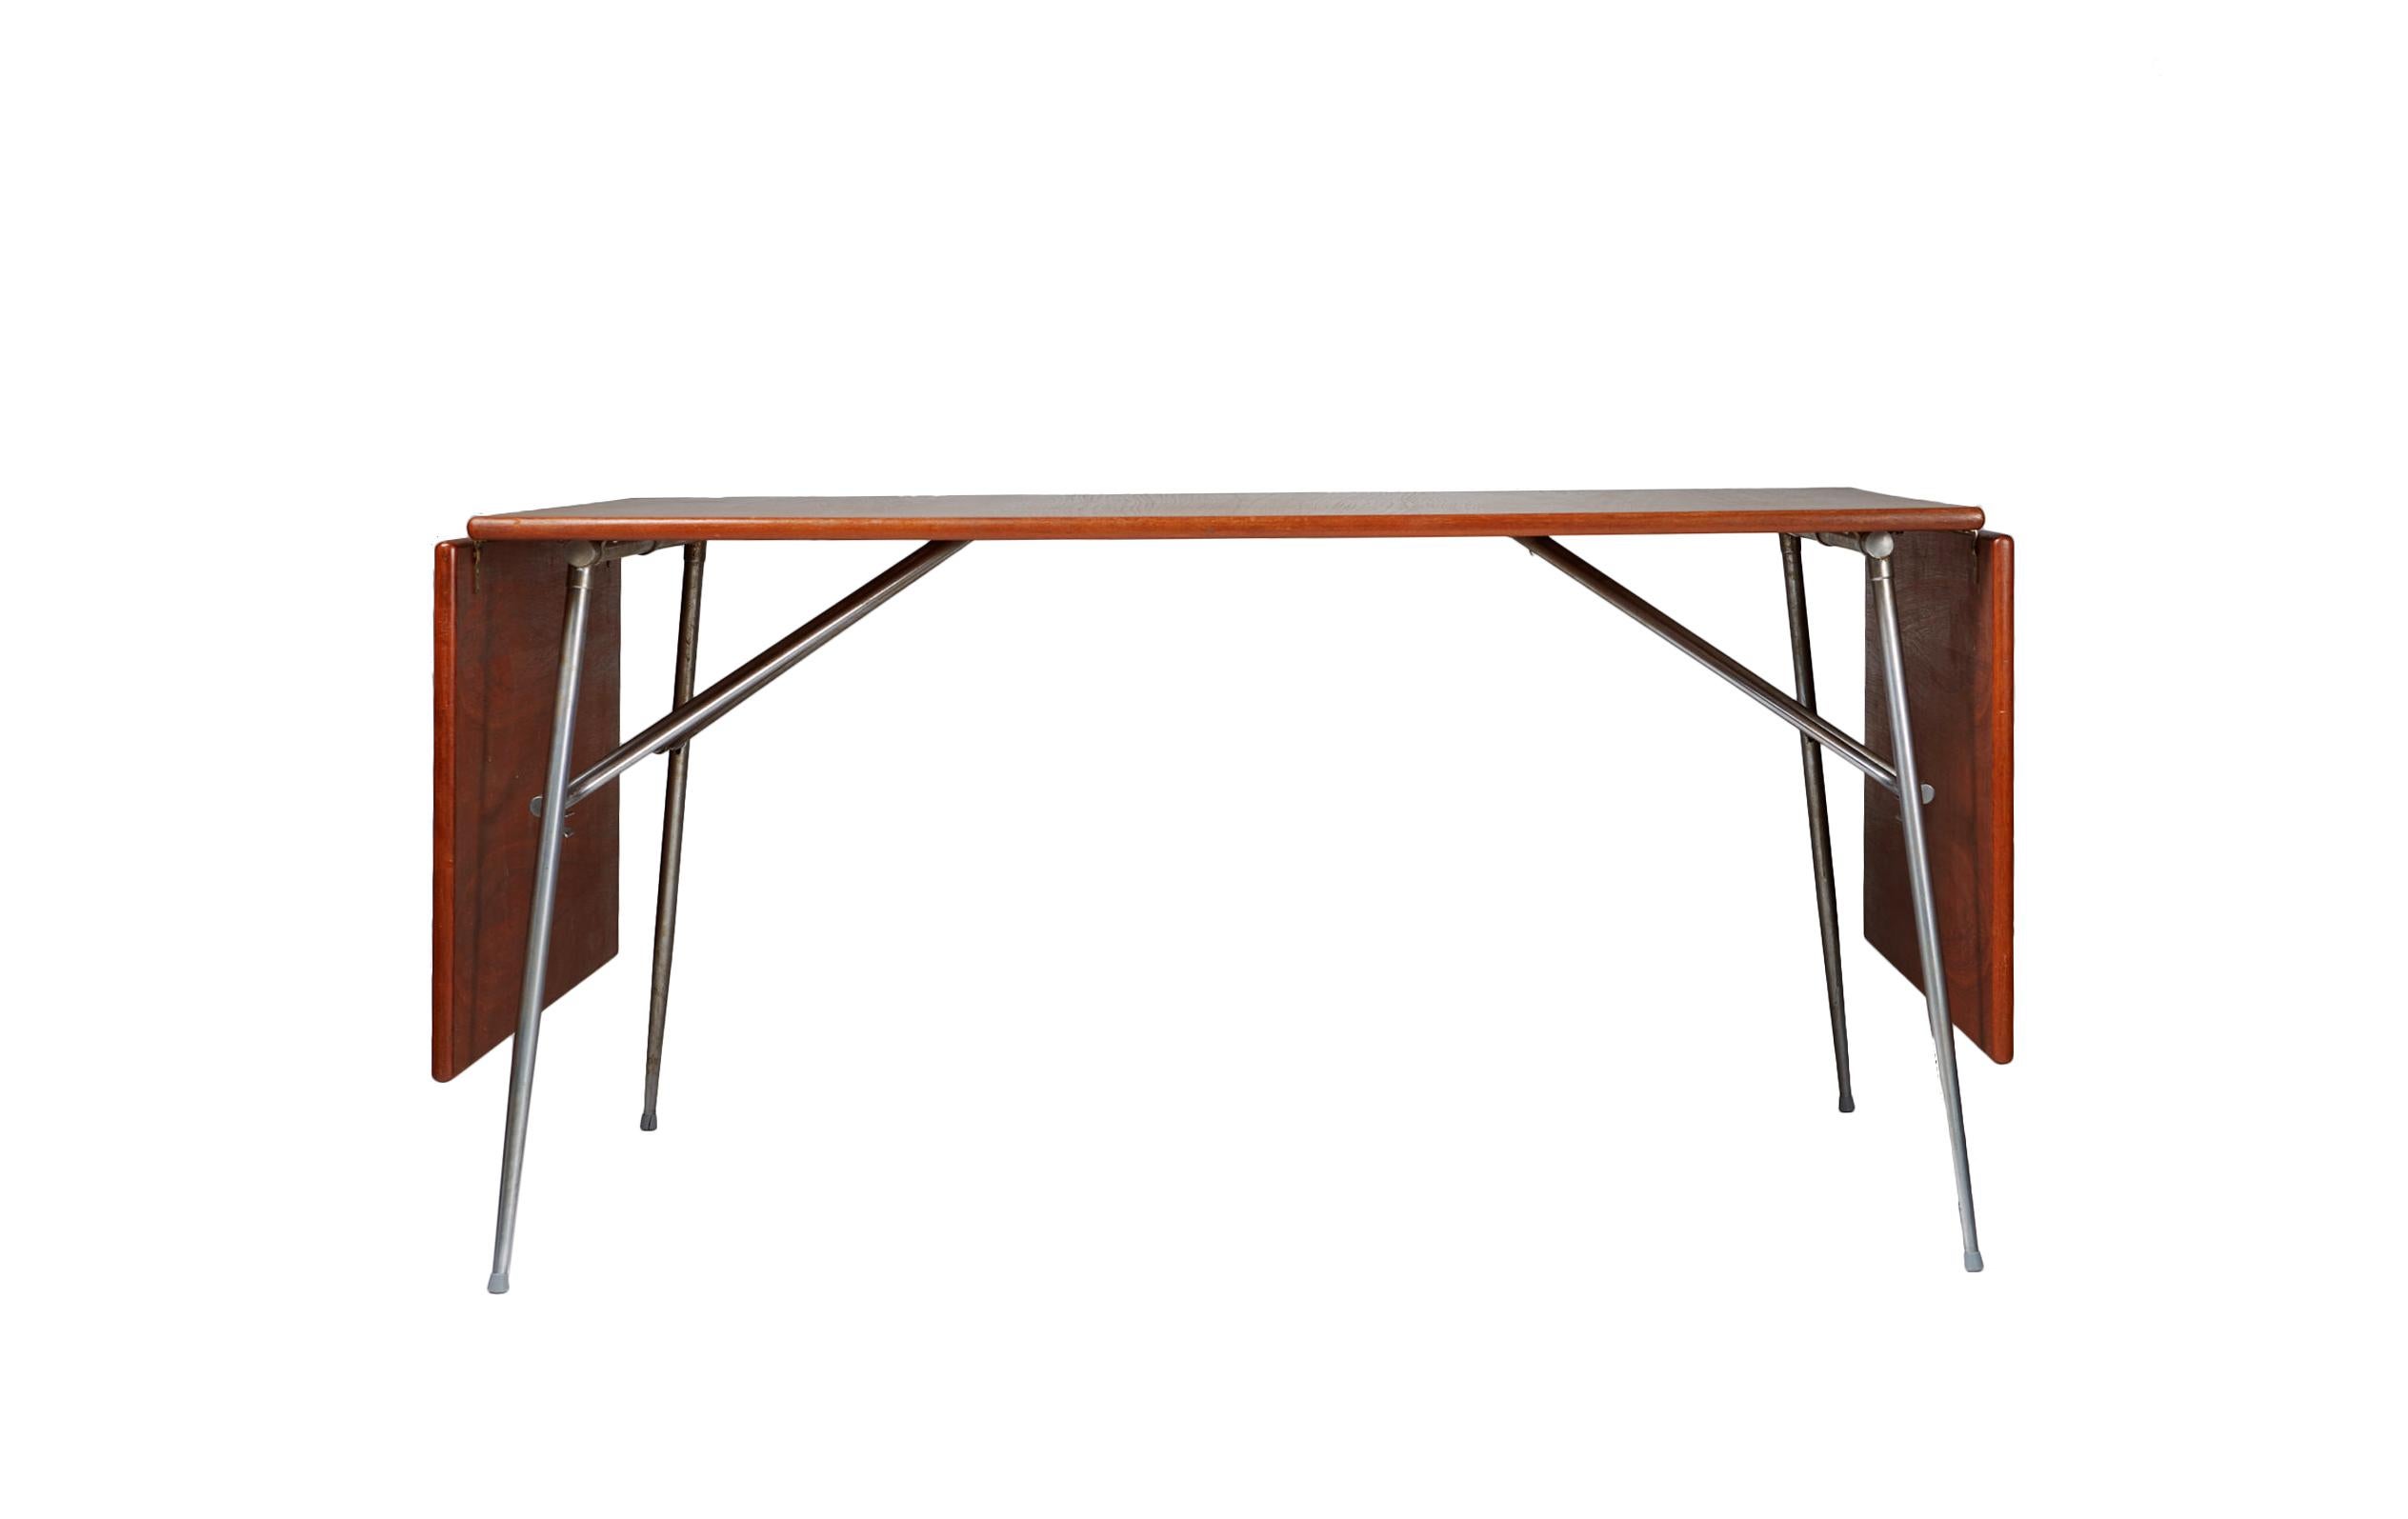 Mid-20th Century Drop-Leaf Desk or Dining Table by Børge Mogensen, Danish, 1950s For Sale